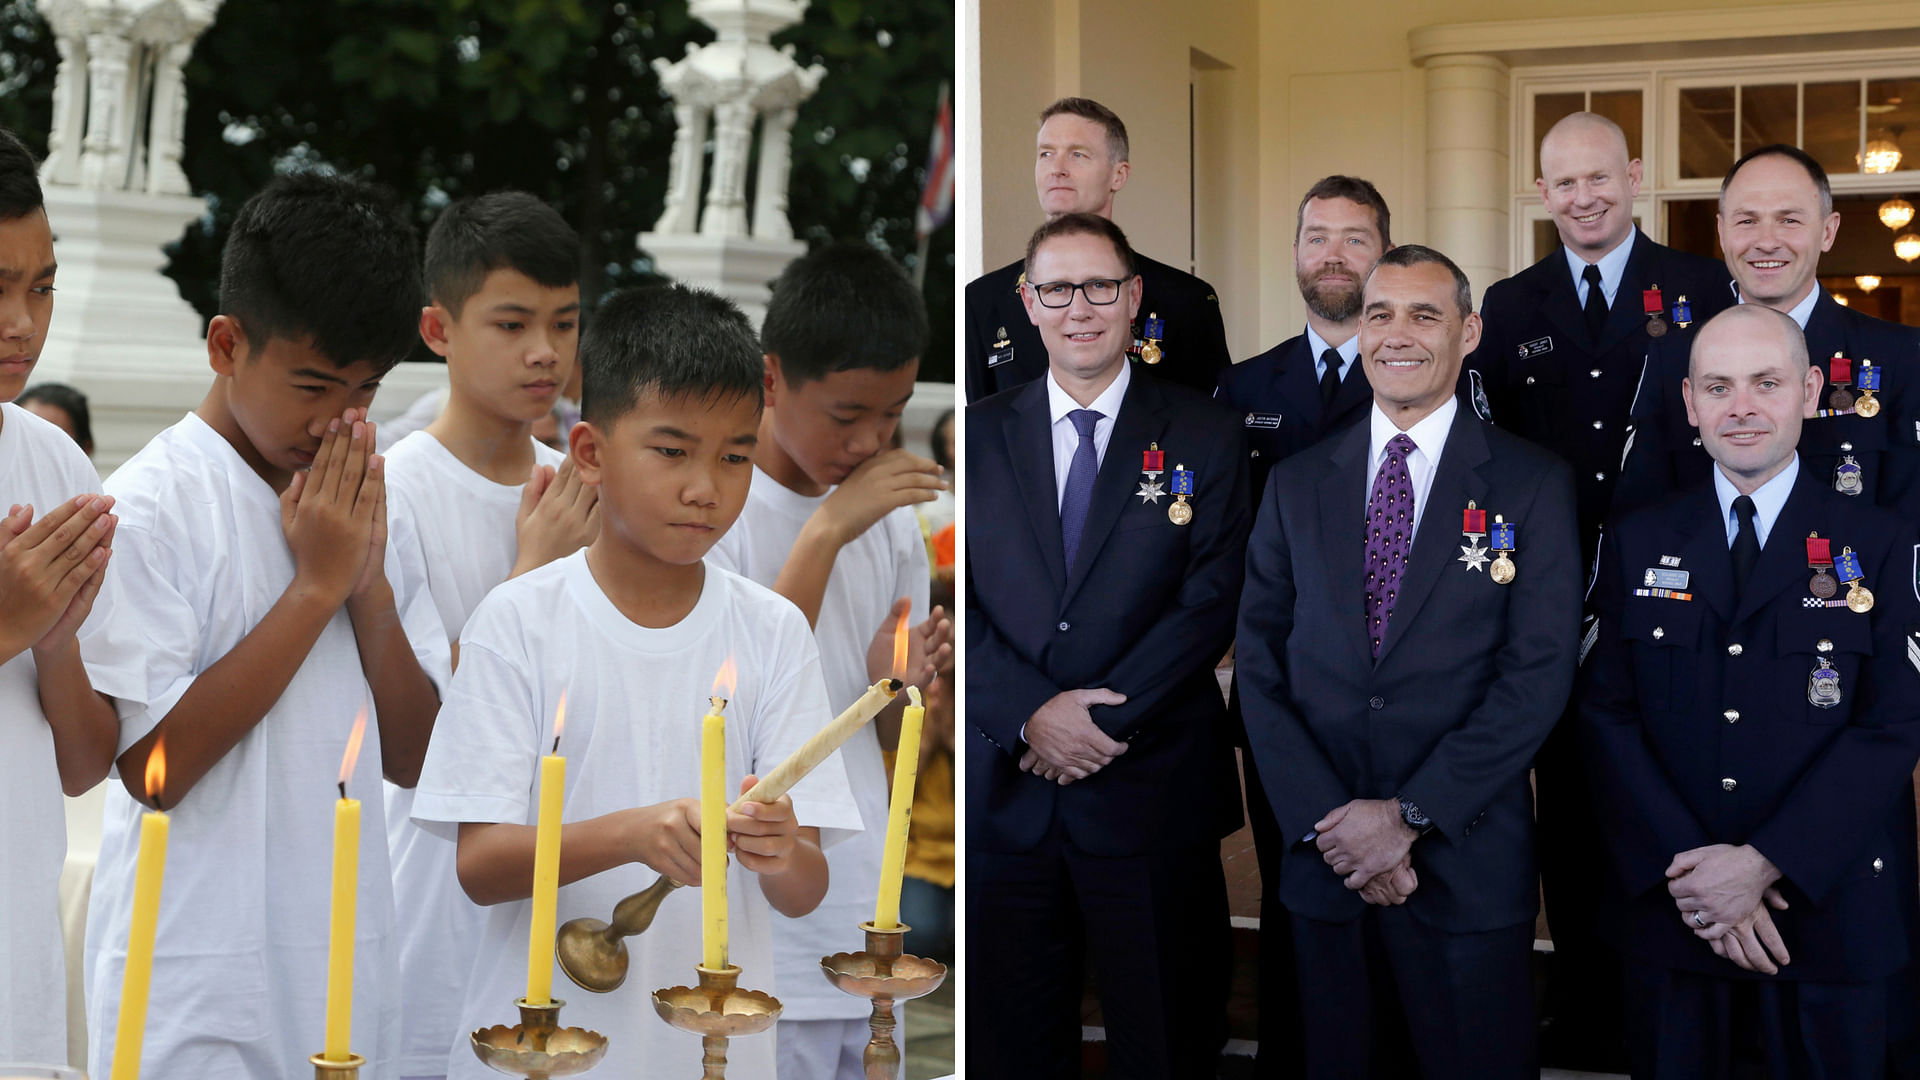 The boys’ soccer team who were rescued from a flooded Thailand cave become Buddhist novices while nine divers who were involved in rescue were awarded for their bravery.